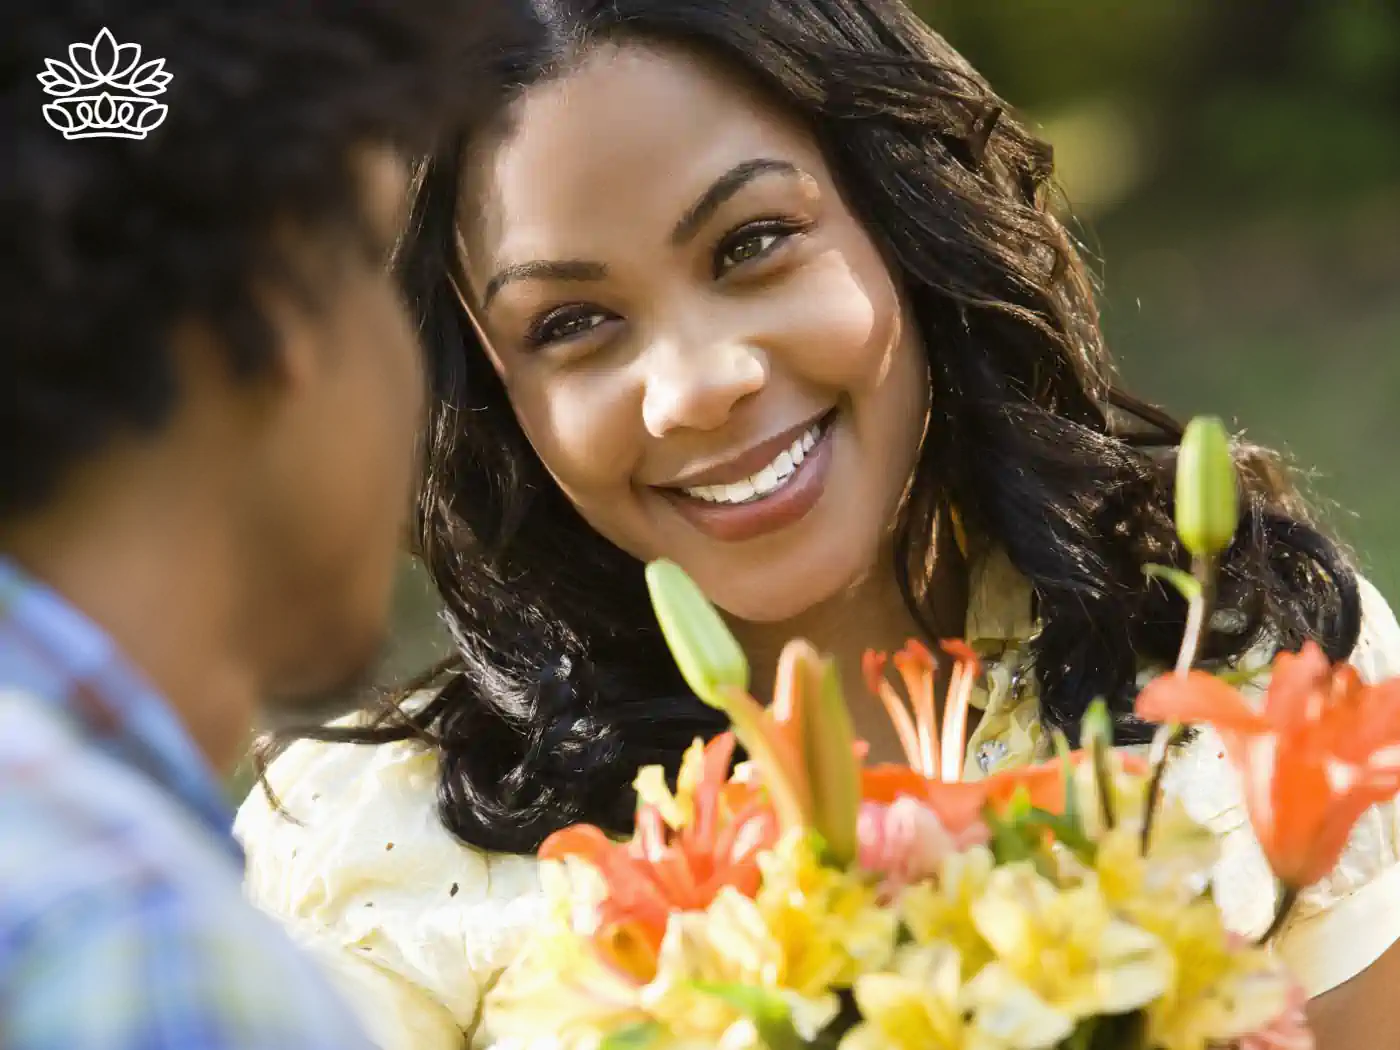 Happy woman receiving a colourful floral bouquet from a man outdoors. Fabulous Flowers and Gifts, Luxury Flower Arrangements.